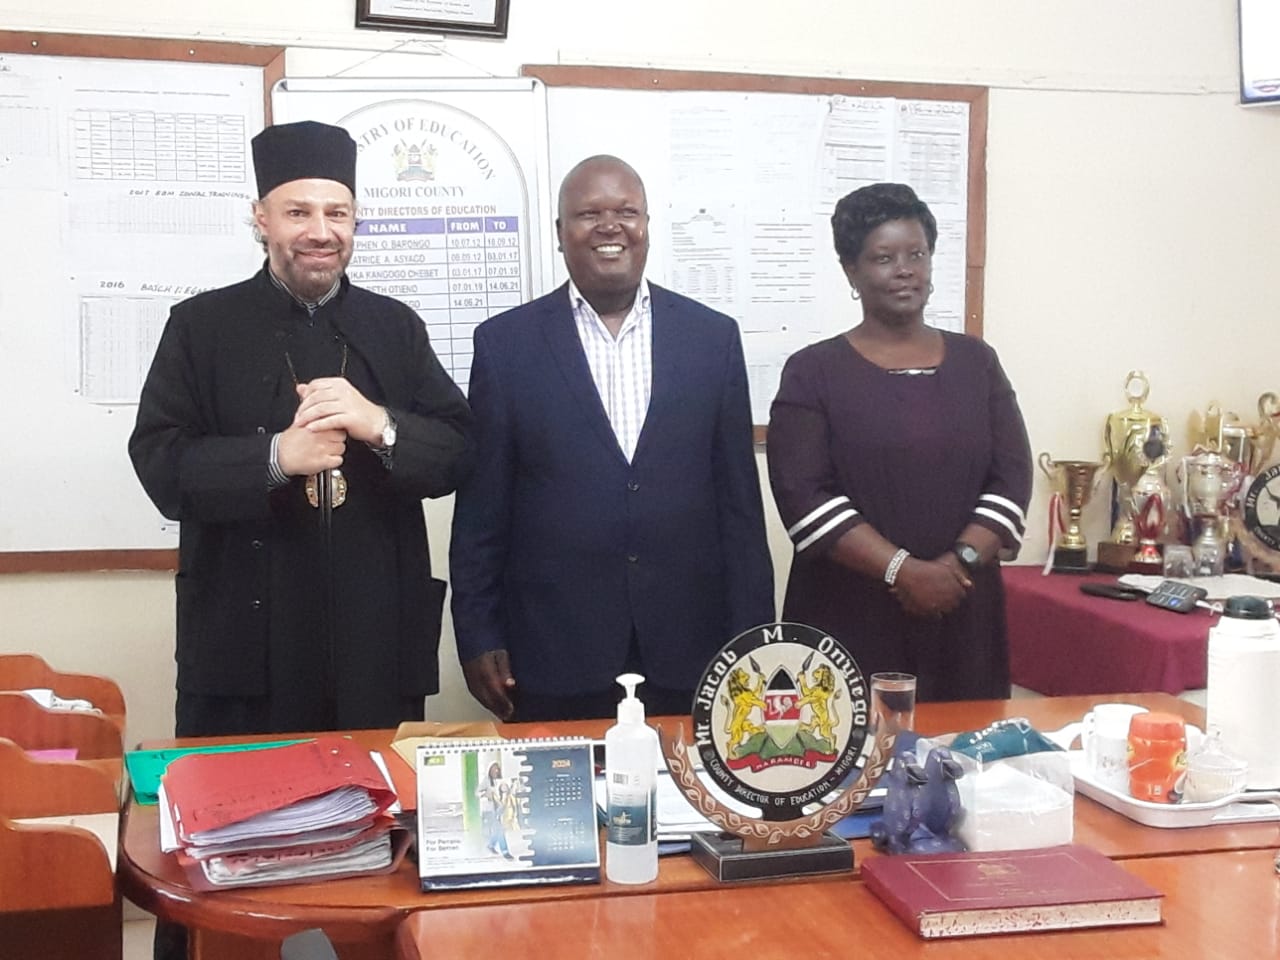 Bishop MARKOS with the Director of Education in Migori County